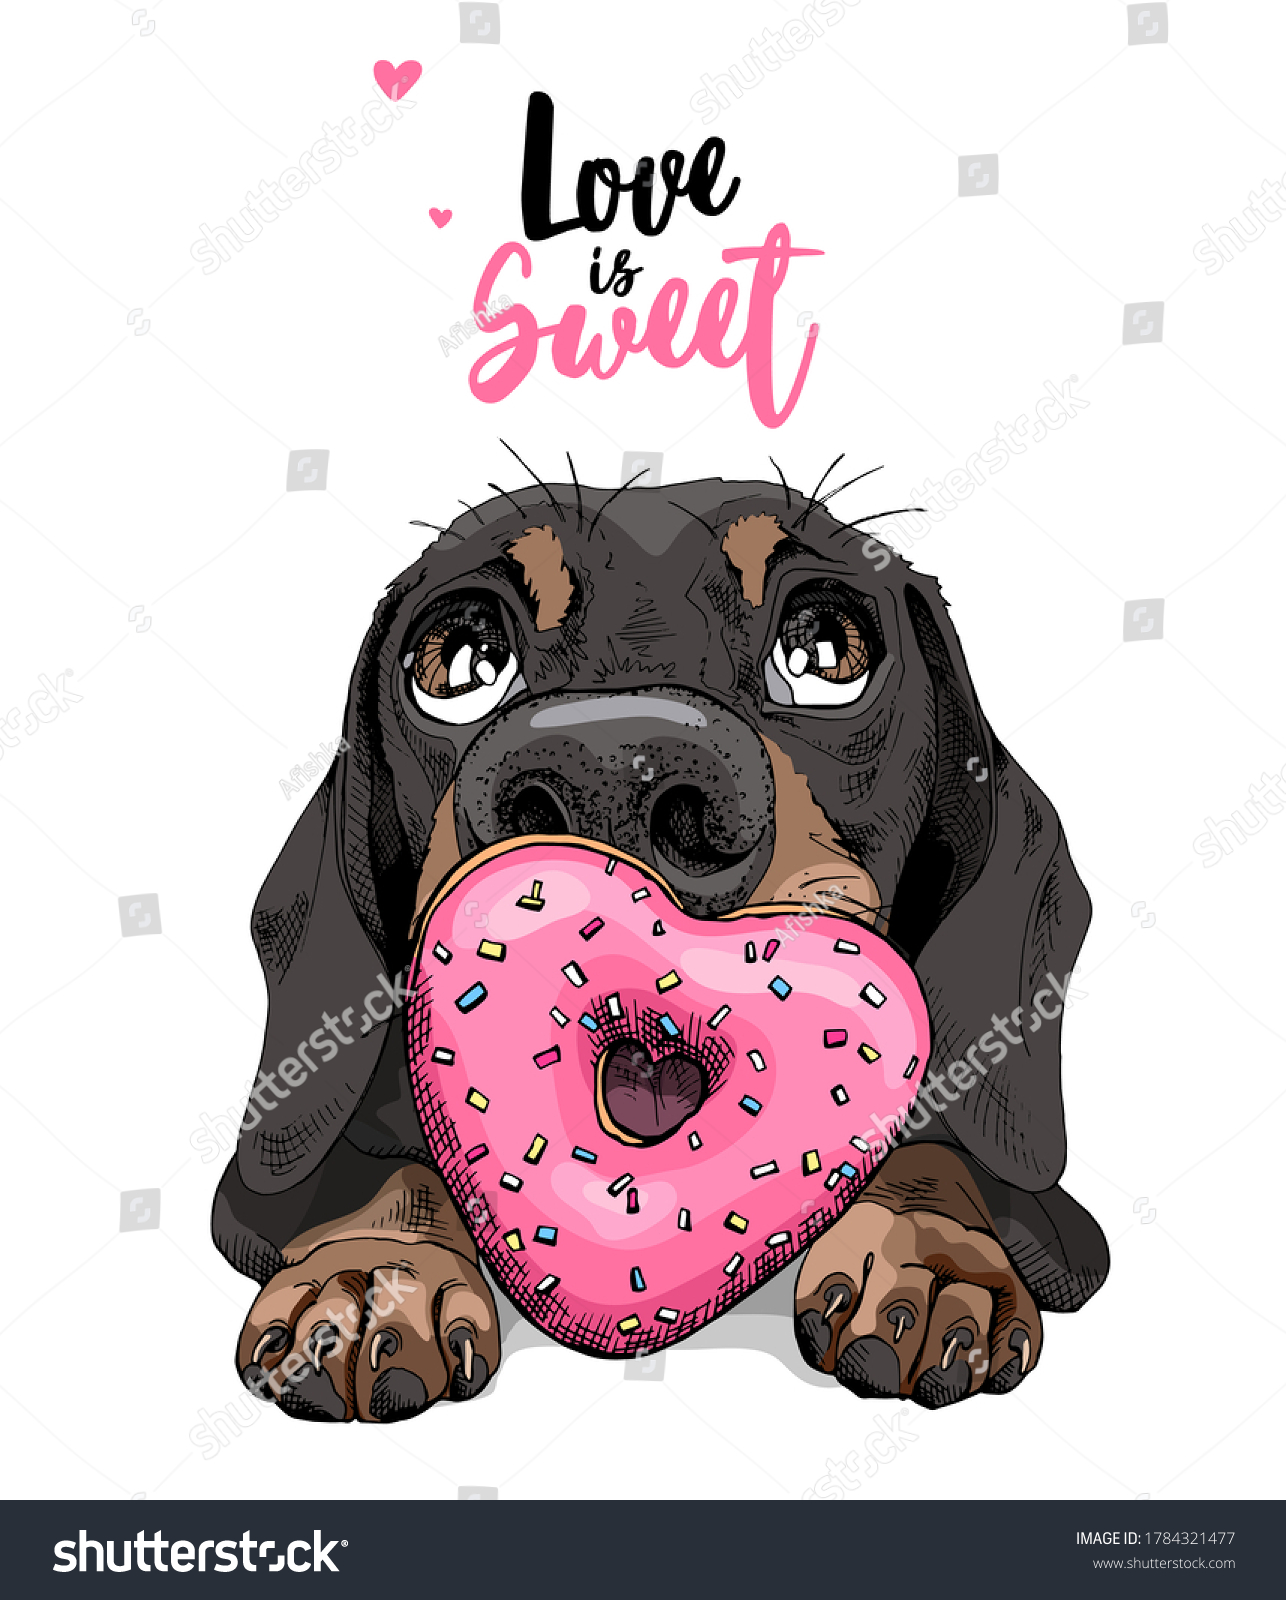 SVG of Portrait of a funny Dachshund dog with pink heart Donut. Love is sweet - lettering quote. Humor card, t-shirt composition, hand drawn style print. Vector illustration. svg